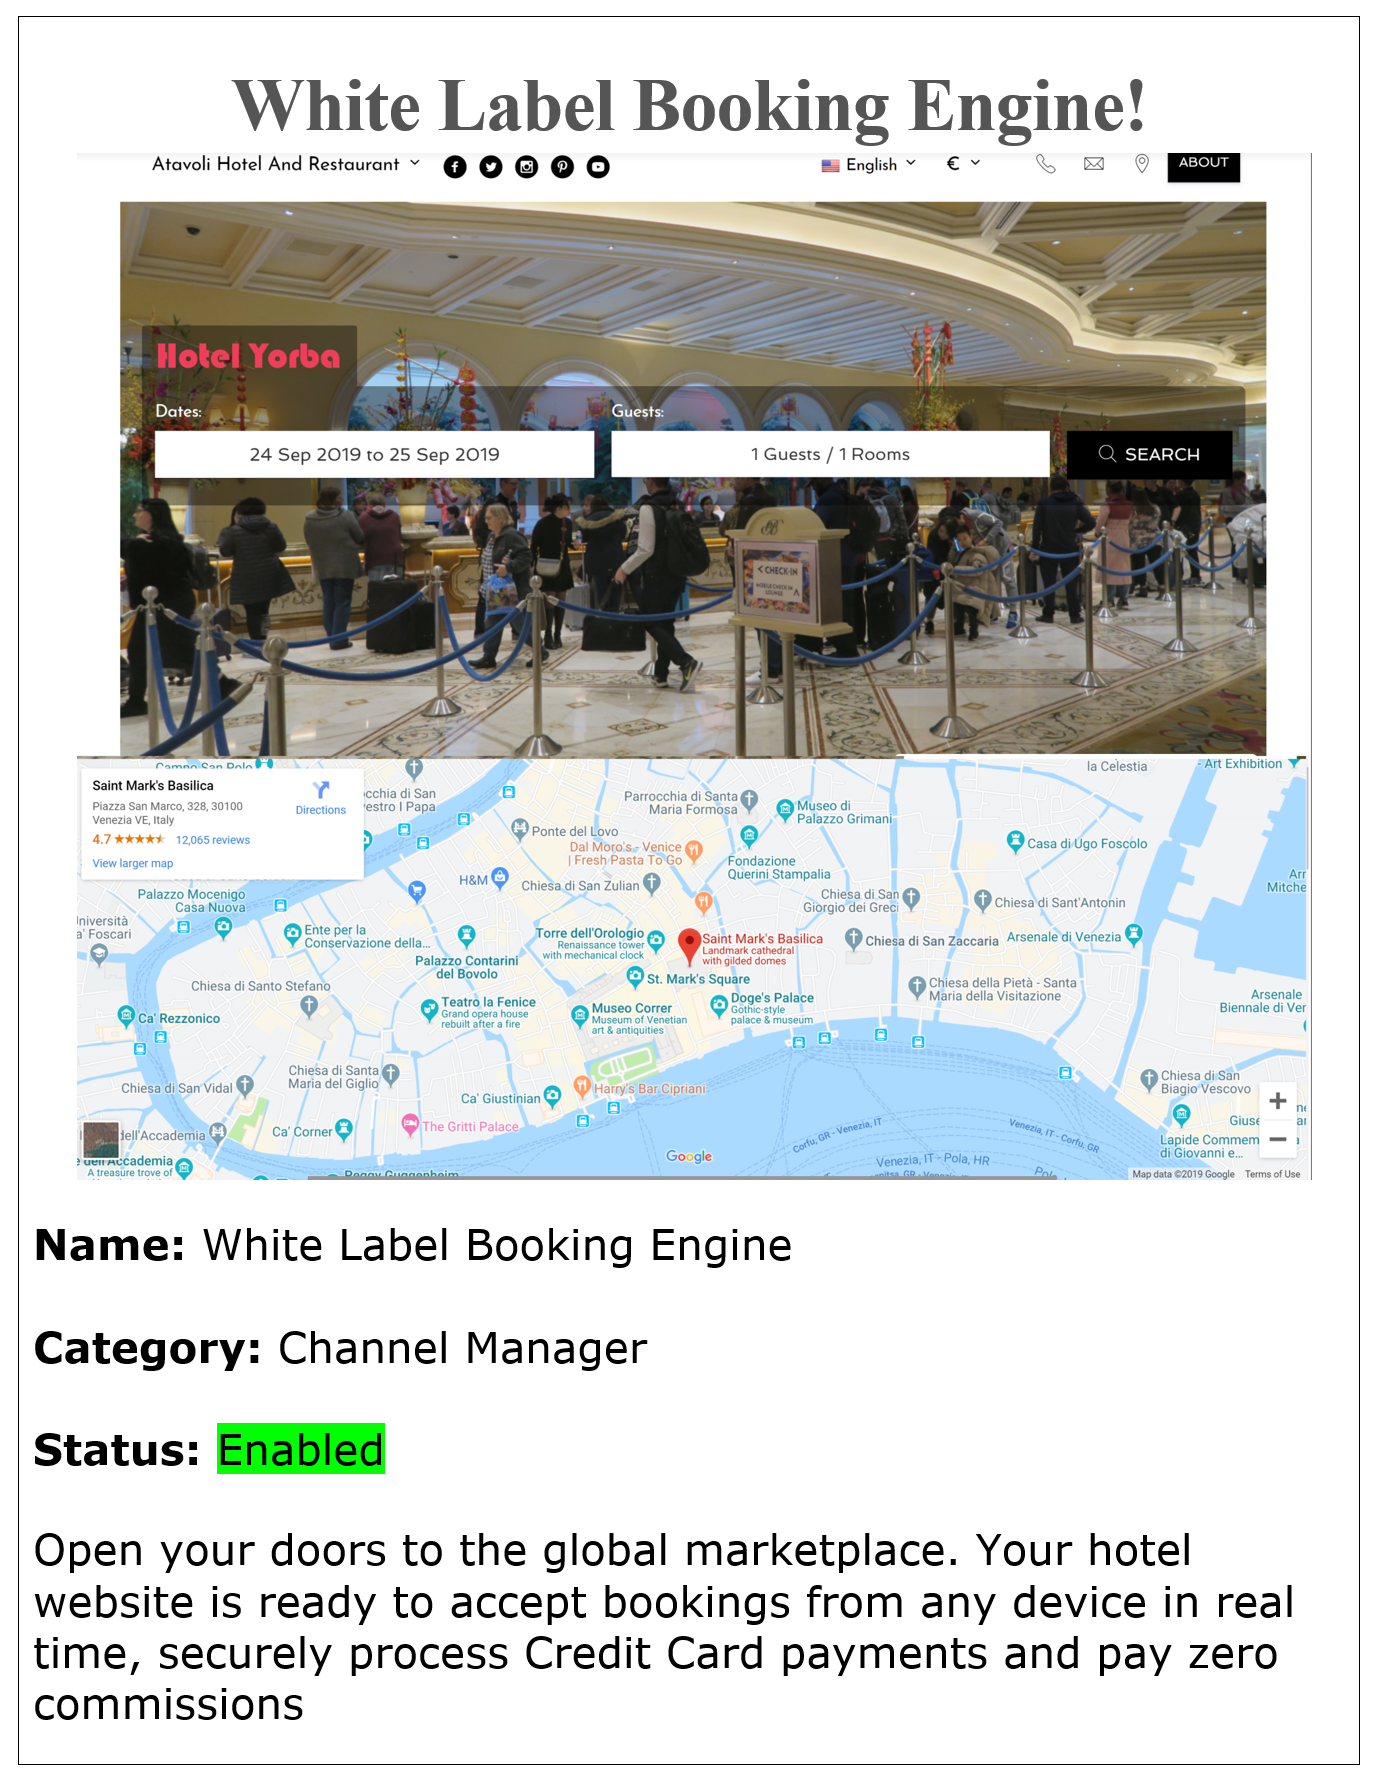 White Label Hotel Booking Engine
        Open your doors to the global marketplace. Your hotel website is ready to accept bookings from any device in real time, securely process Credit Card payments and pay zero commissions